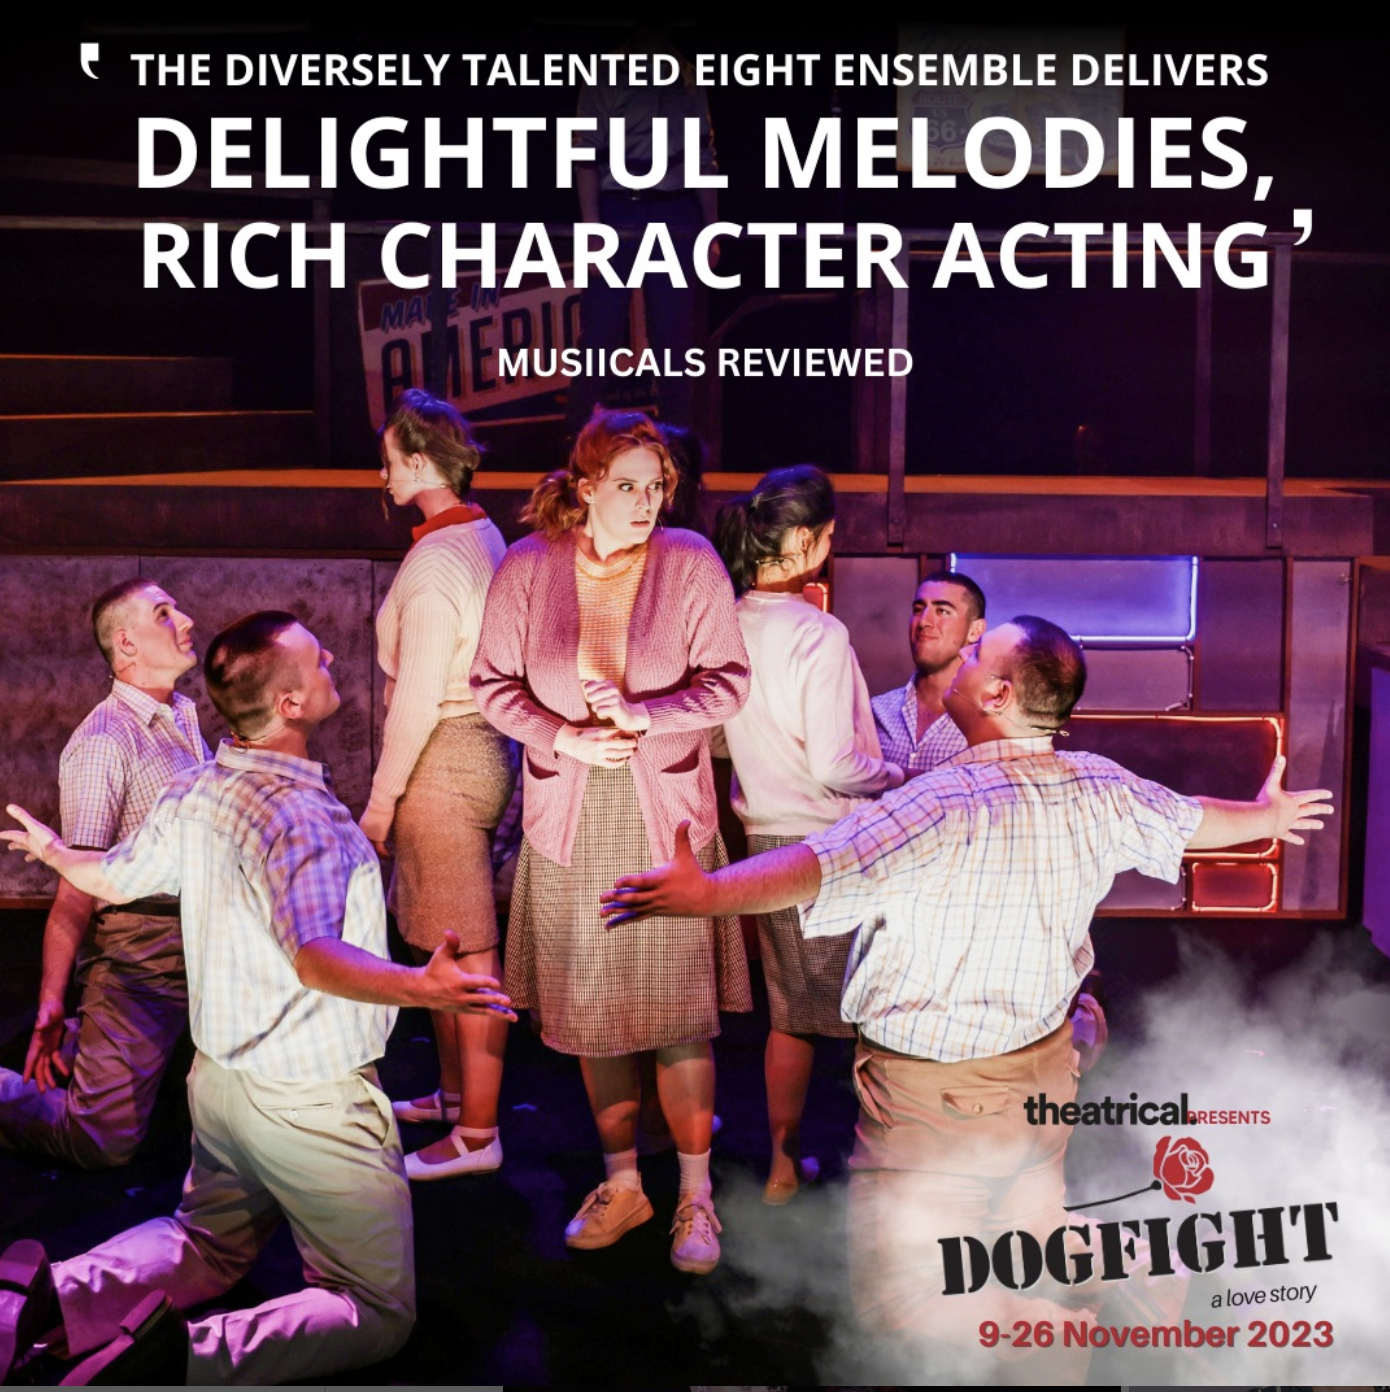 Image of DogFight The Musical Show and quote Delightful Melodies rich character acting